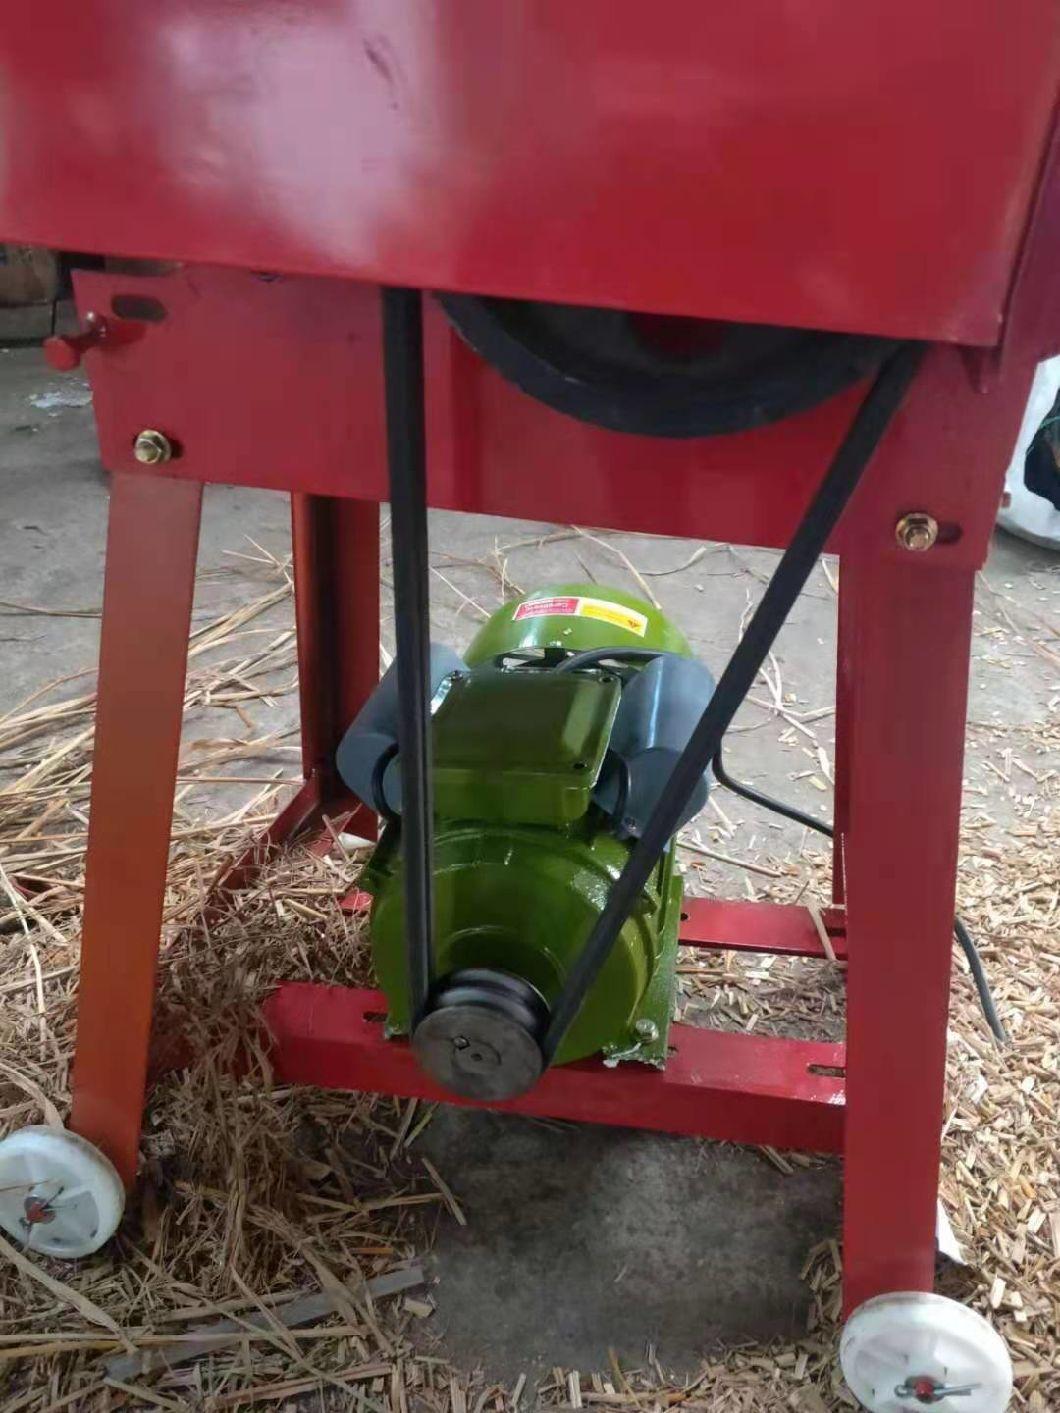 Portable Grinding Type Manufacturer Selling Chaff Slicer Machinery for Cutting Grass